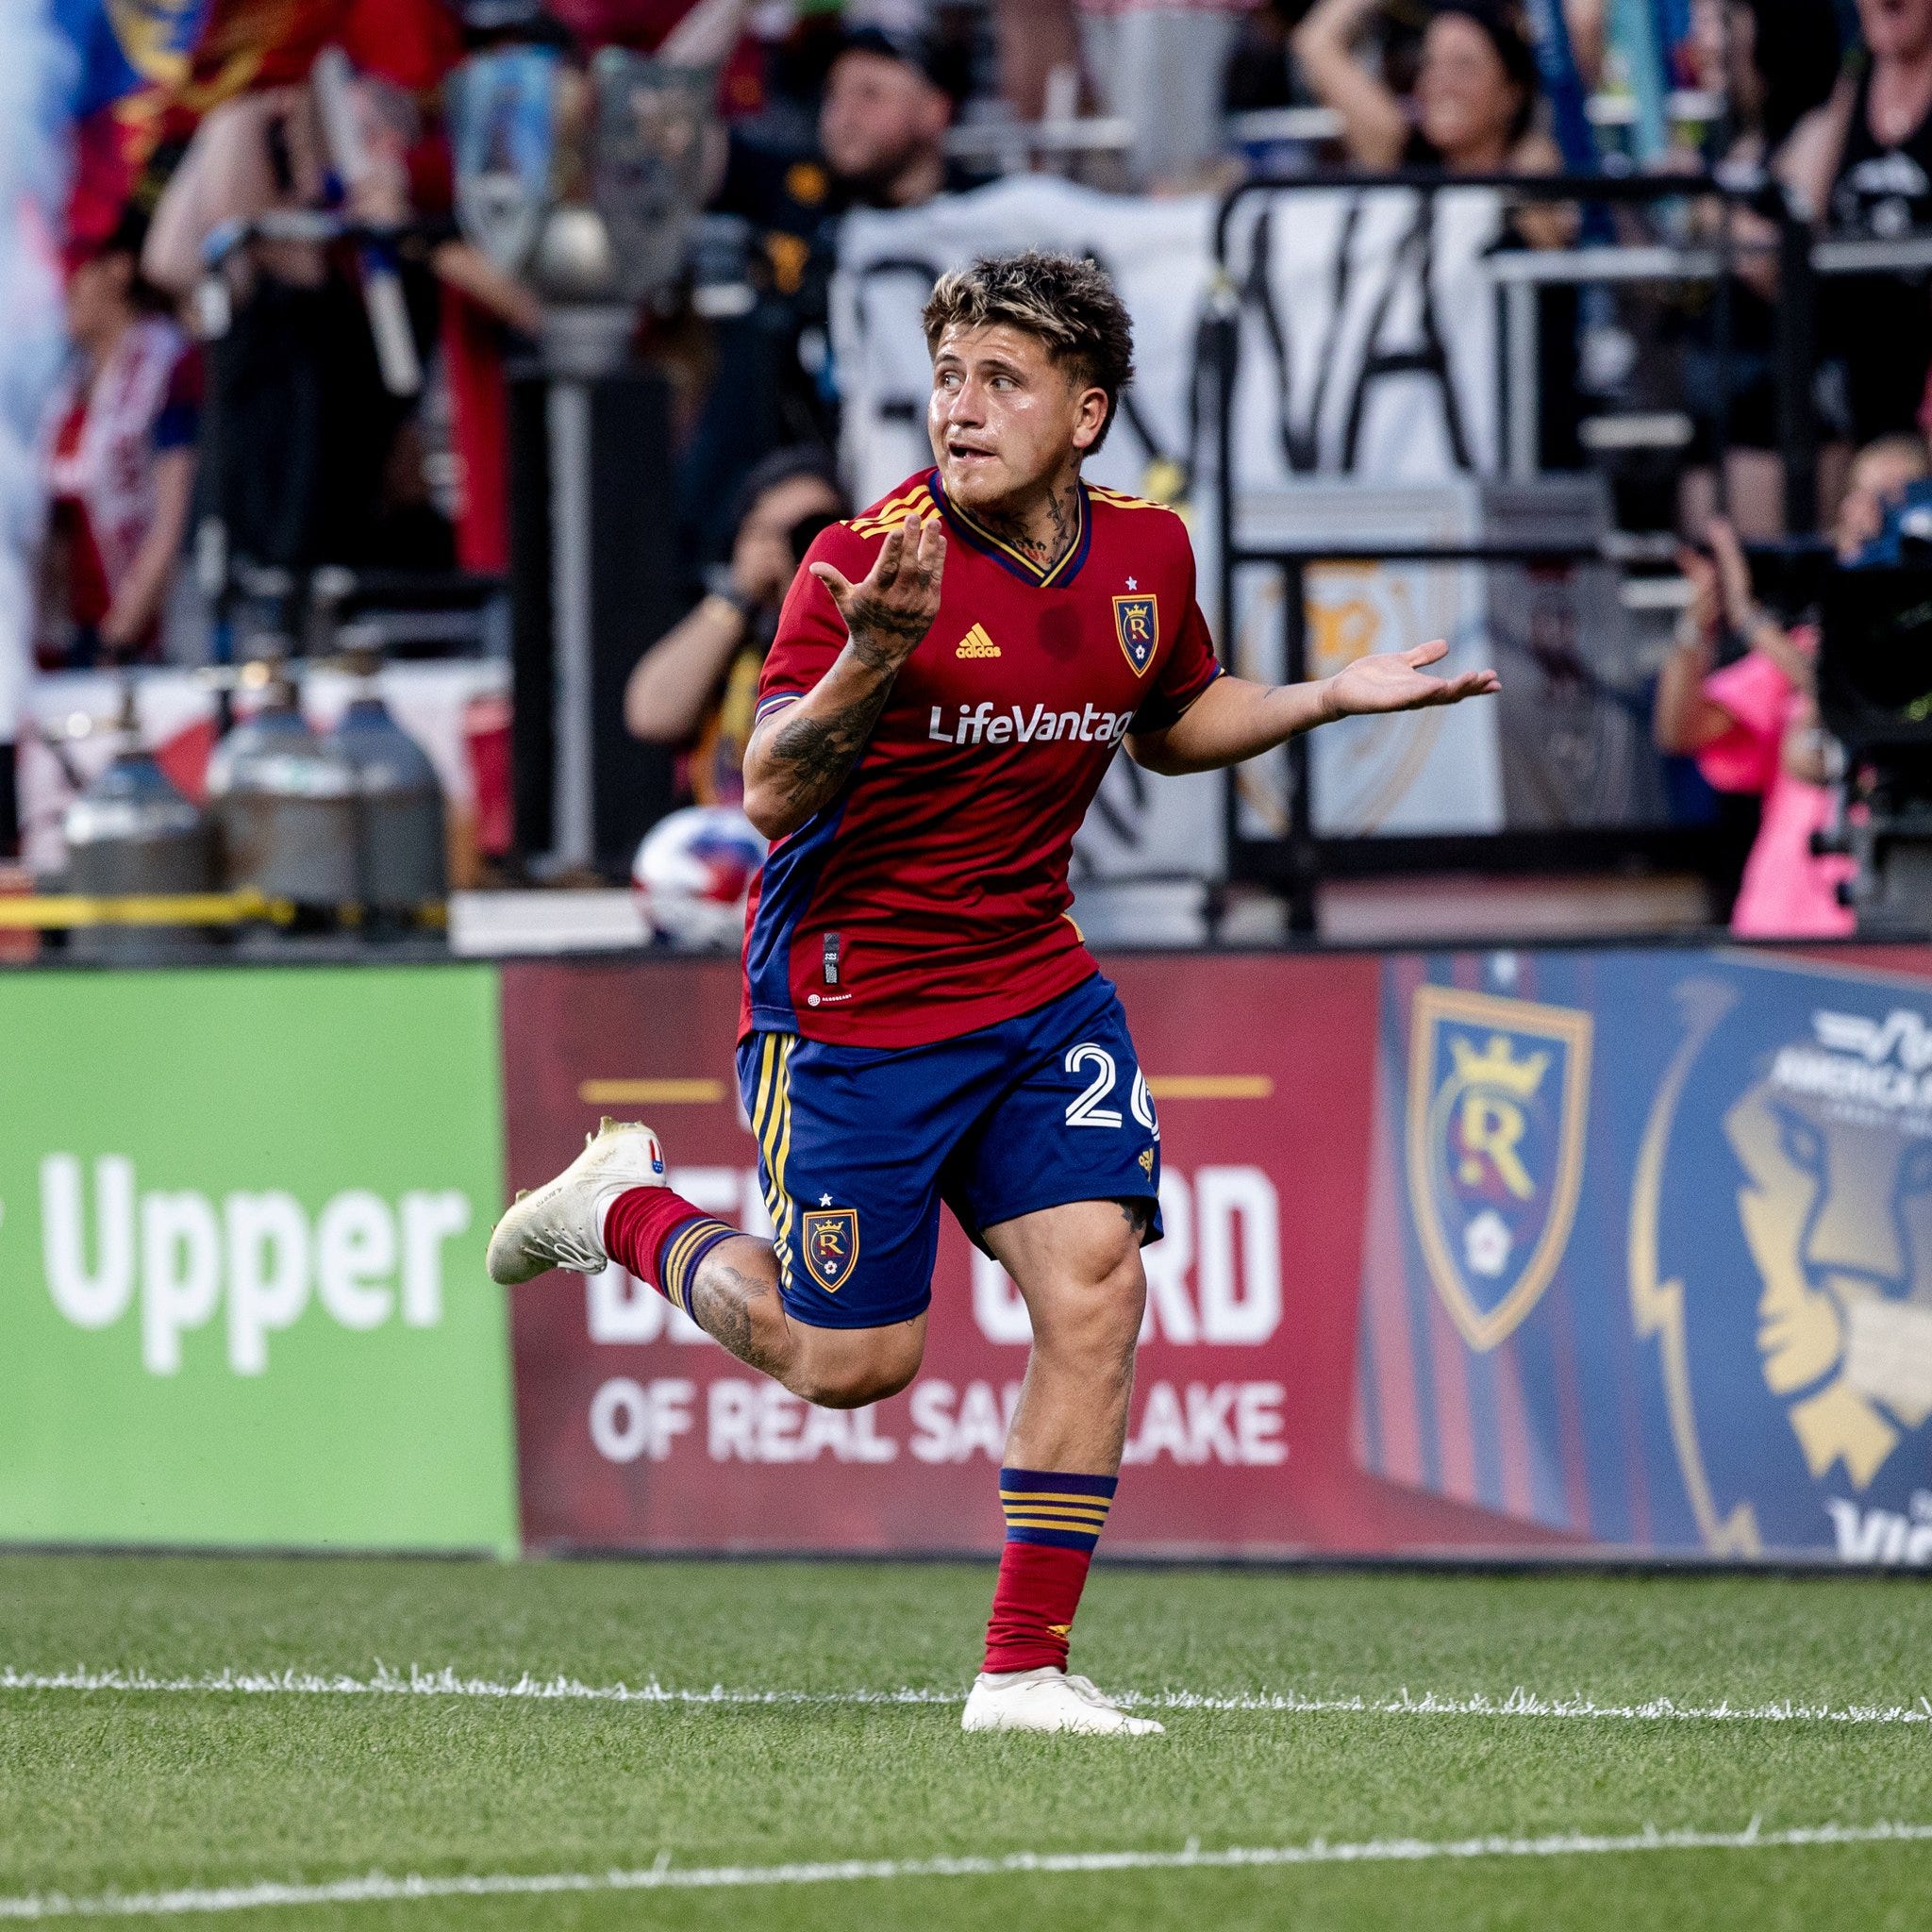 Real Salt Lake defeats the New York Red Bulls, extends its